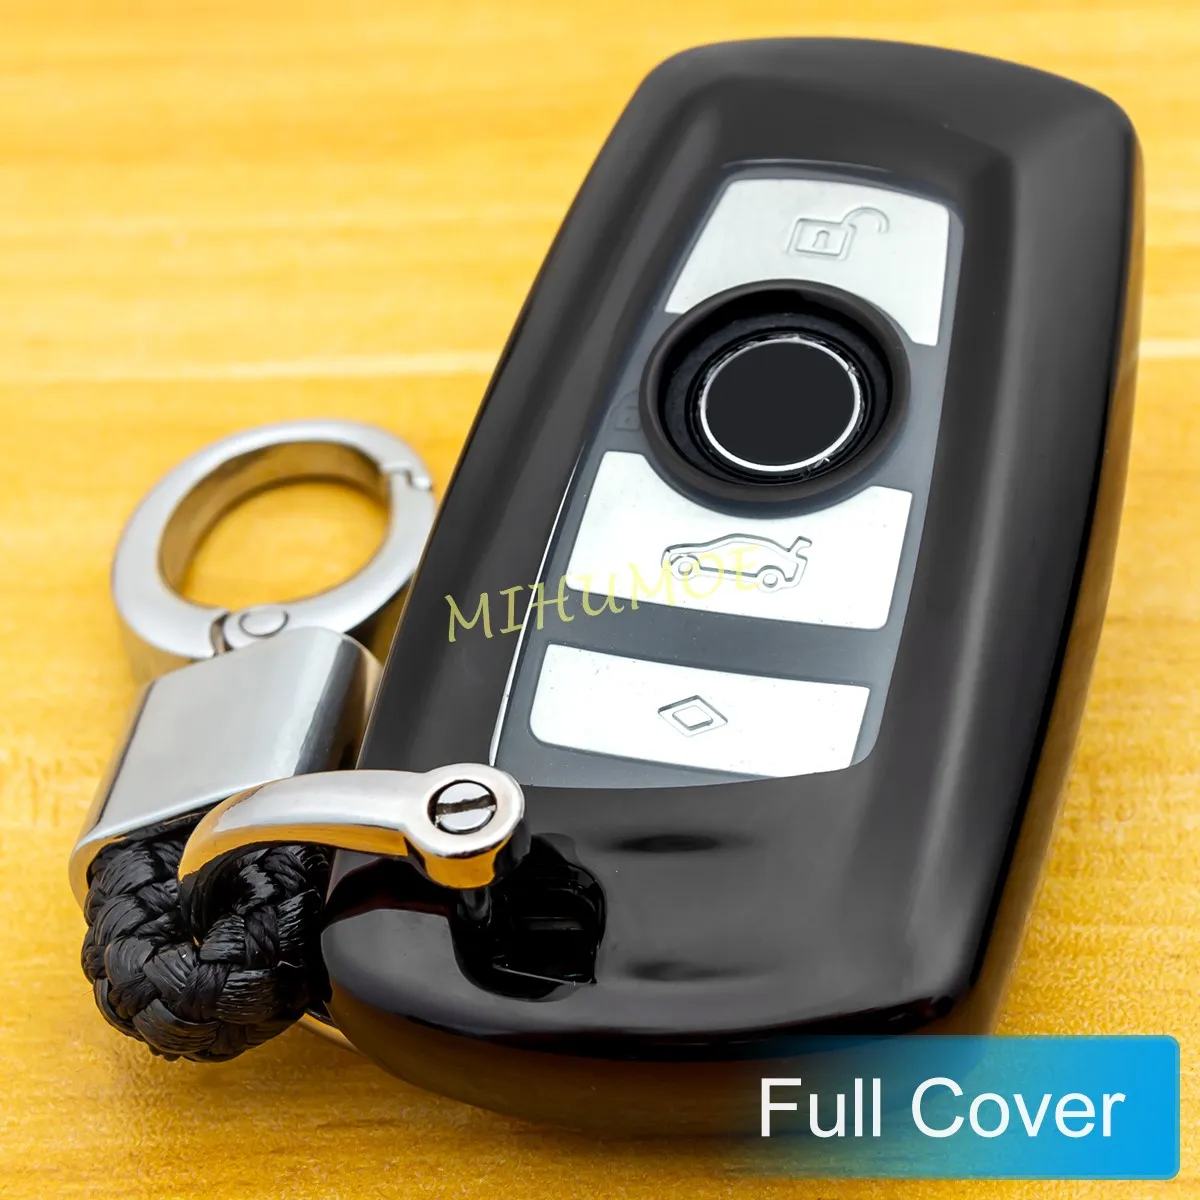 

Black Car Key Fob Case Cover Protector For BMW F20 F21 F22 F23 F30 F31 F34 F32 F33 F36 F10 F11 F07 F06 F12 F13 F01 F25 F26 F80